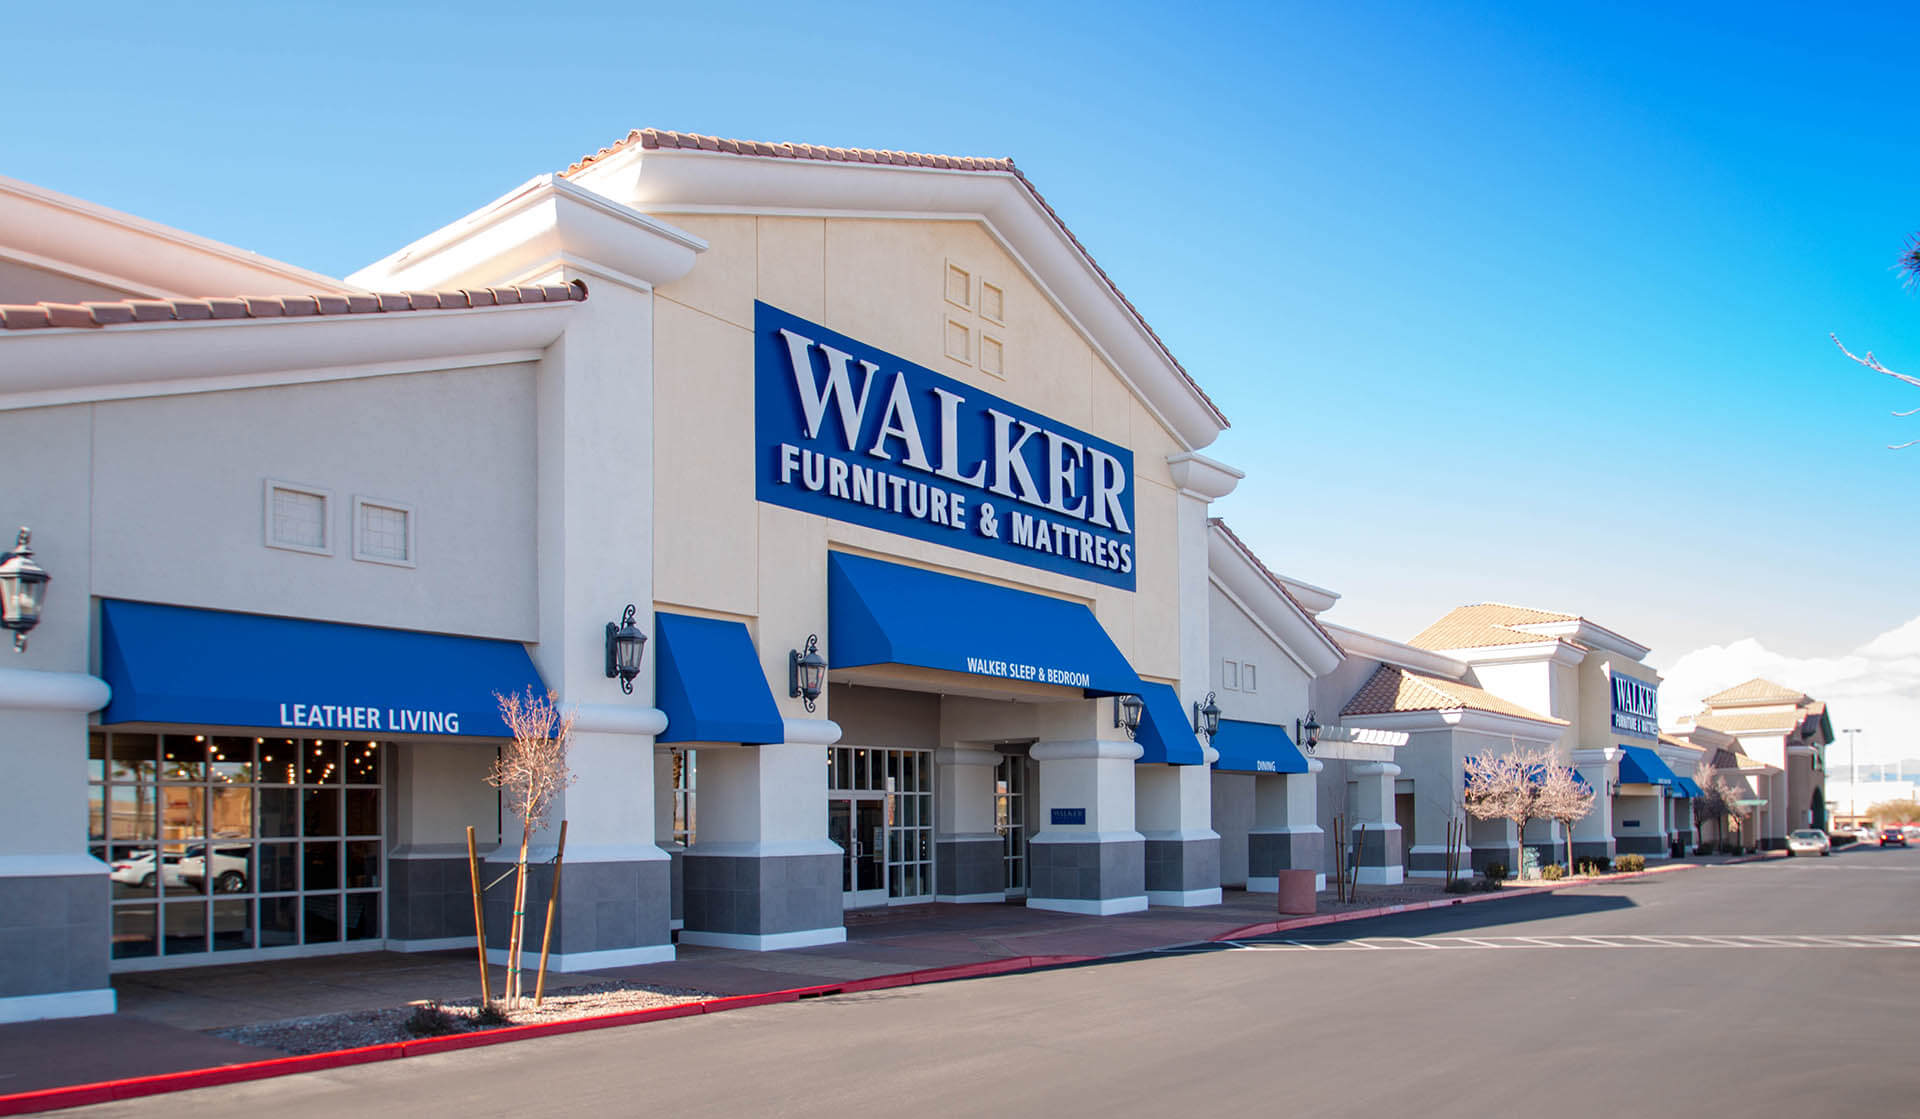 Walker Furniture and Mattress of Henderson, Nevada - Awnings by Metro Awnings of Las Vegas, Nevada